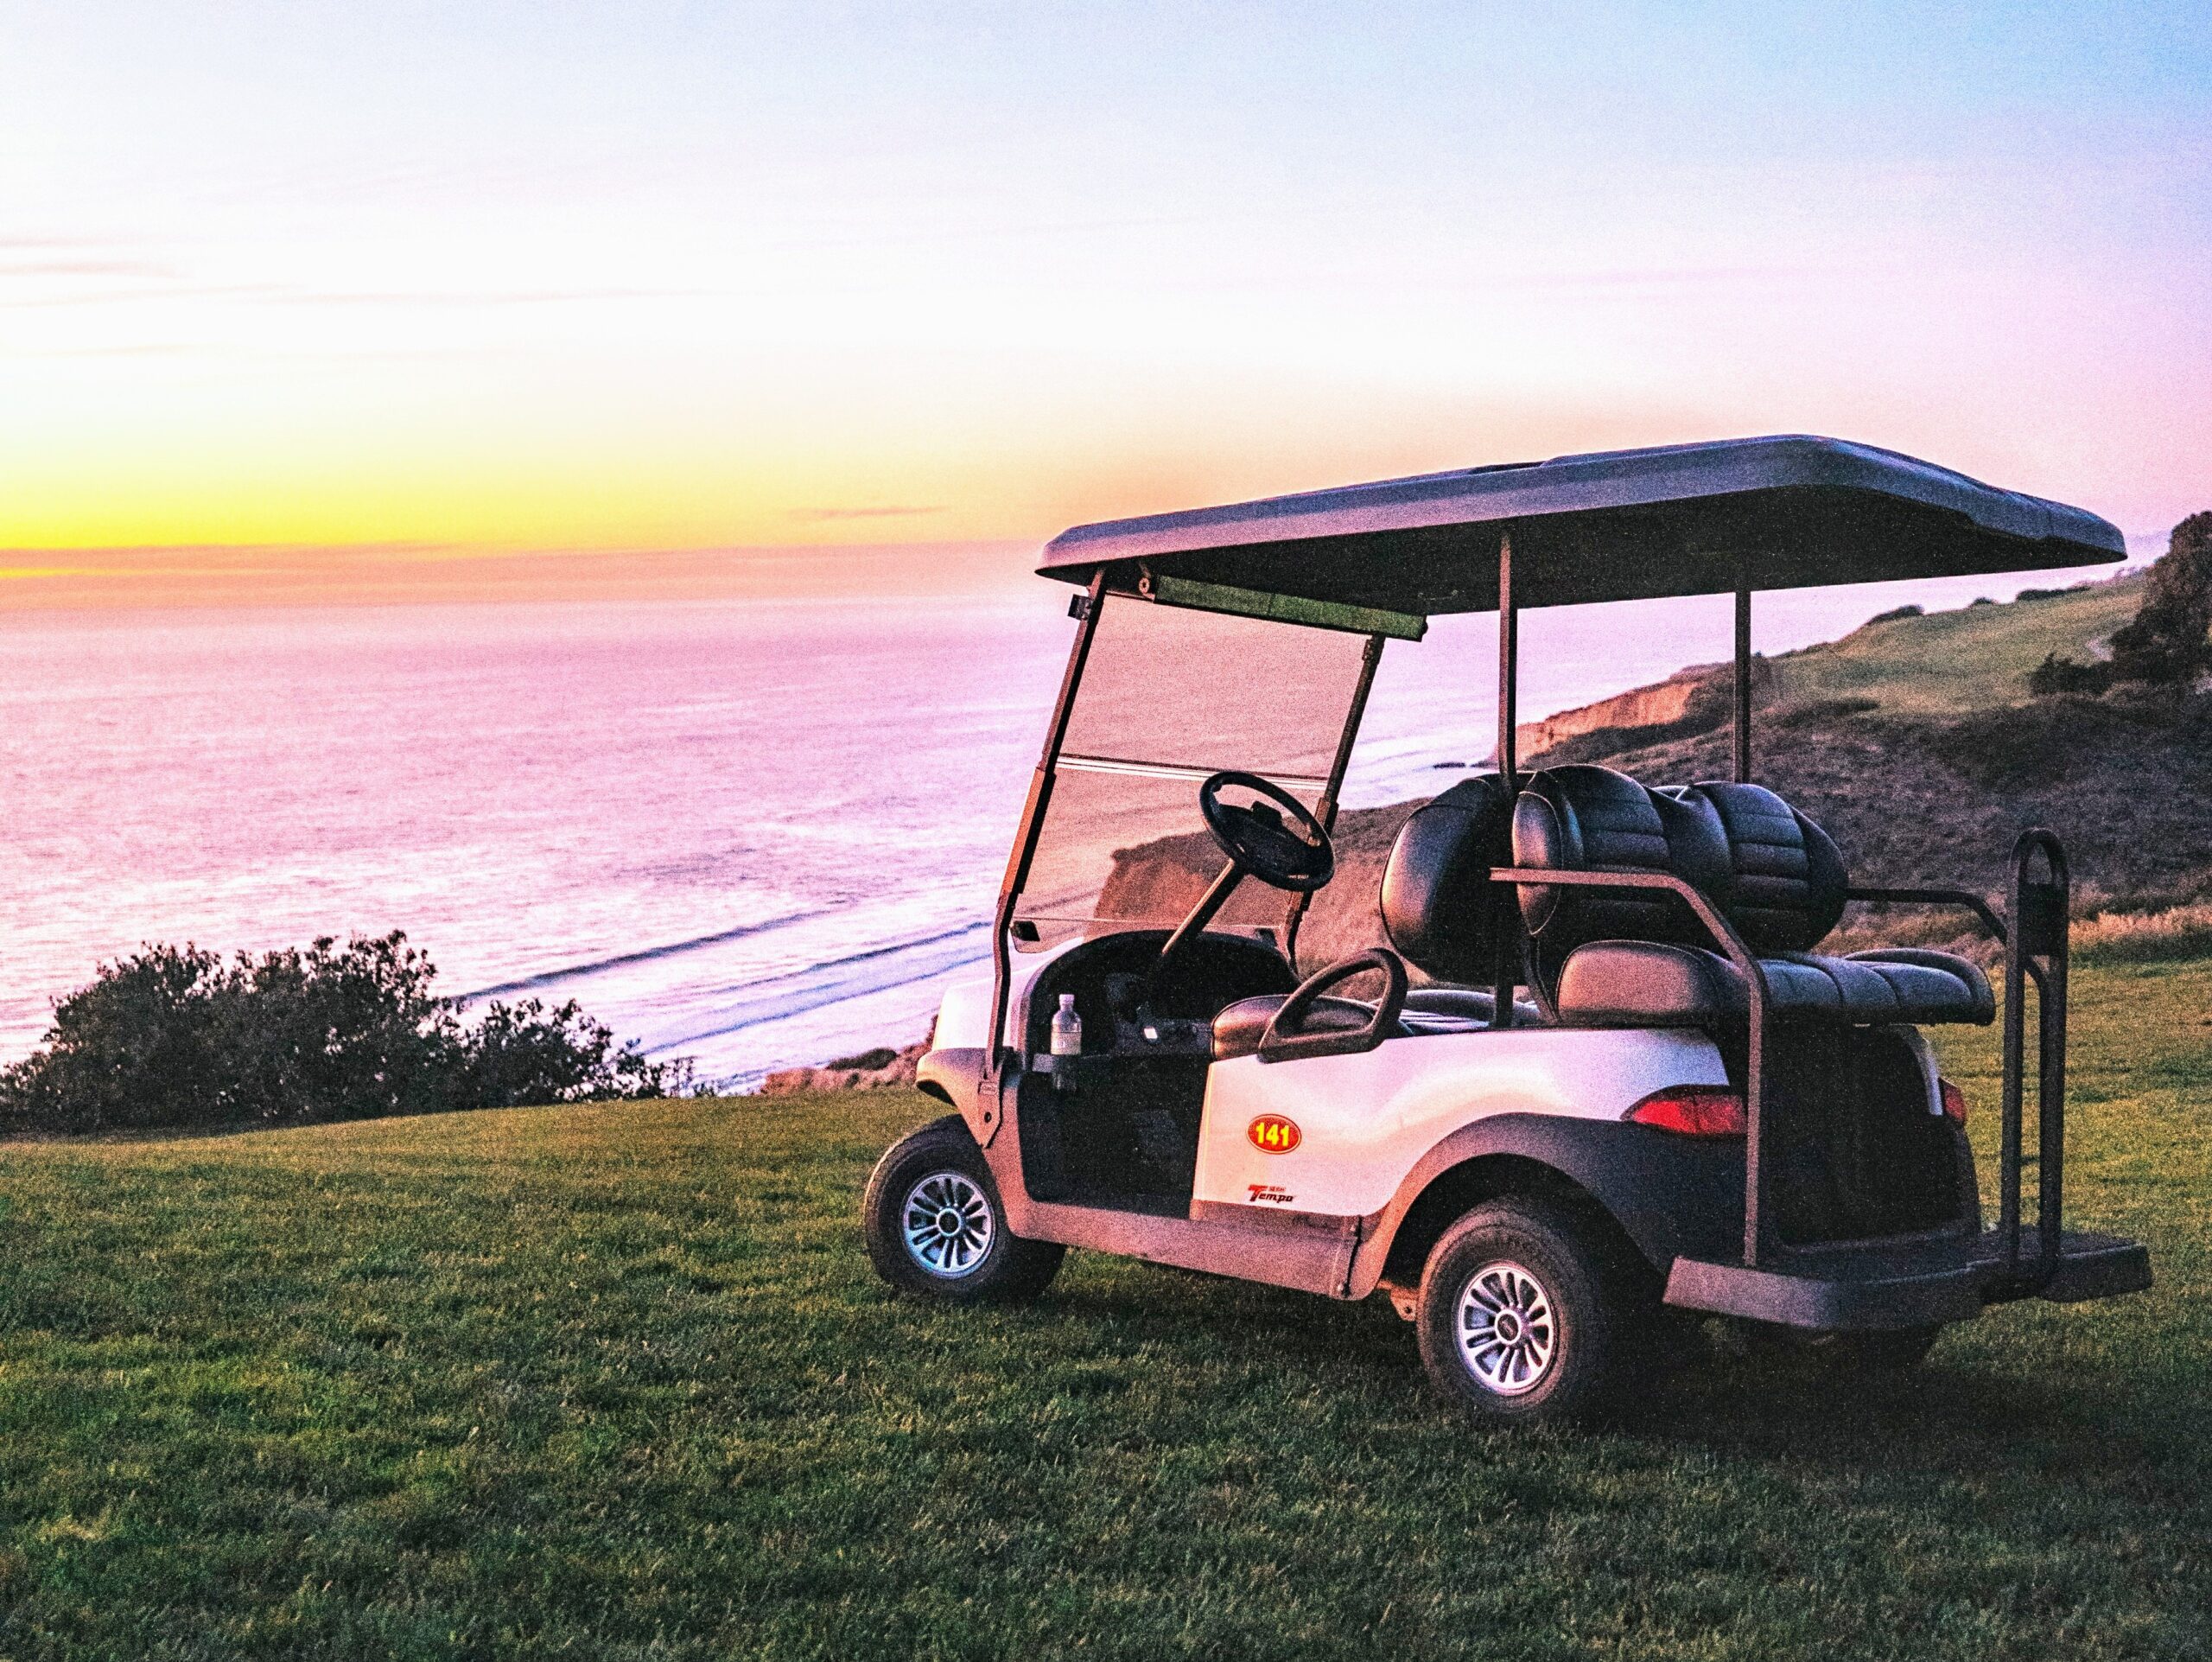 Top 9 Reasons to Own a Golf Cart for Daily Transportation